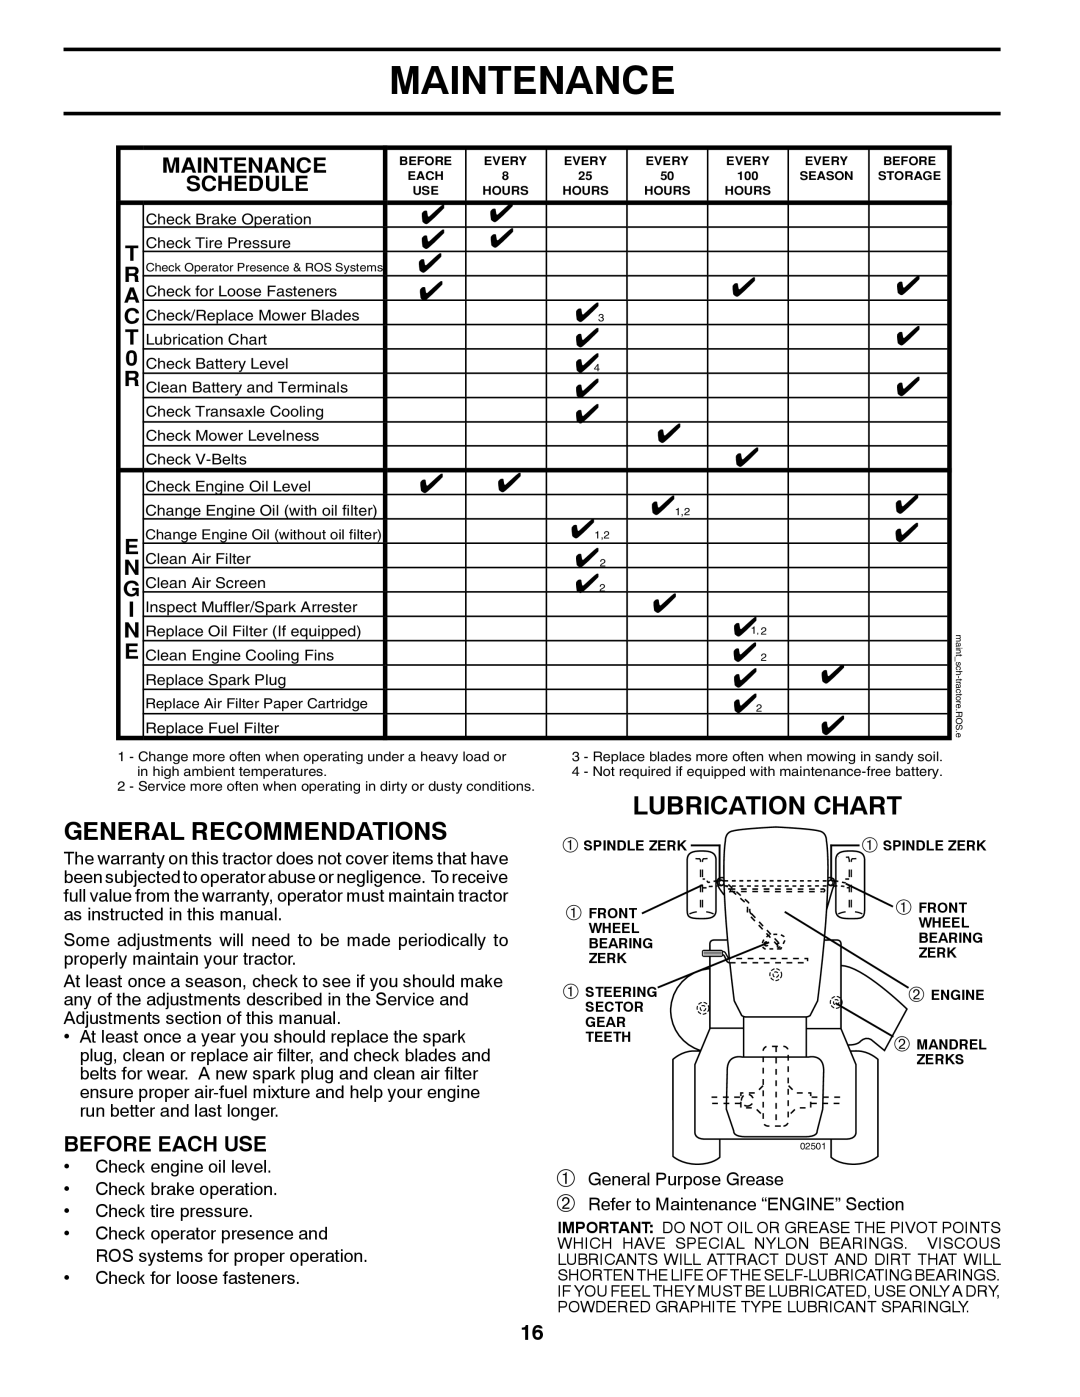 Husqvarna 96043006800, 2354GXLS owner manual Maintenance, Lubrication Chart, Before Each Use 